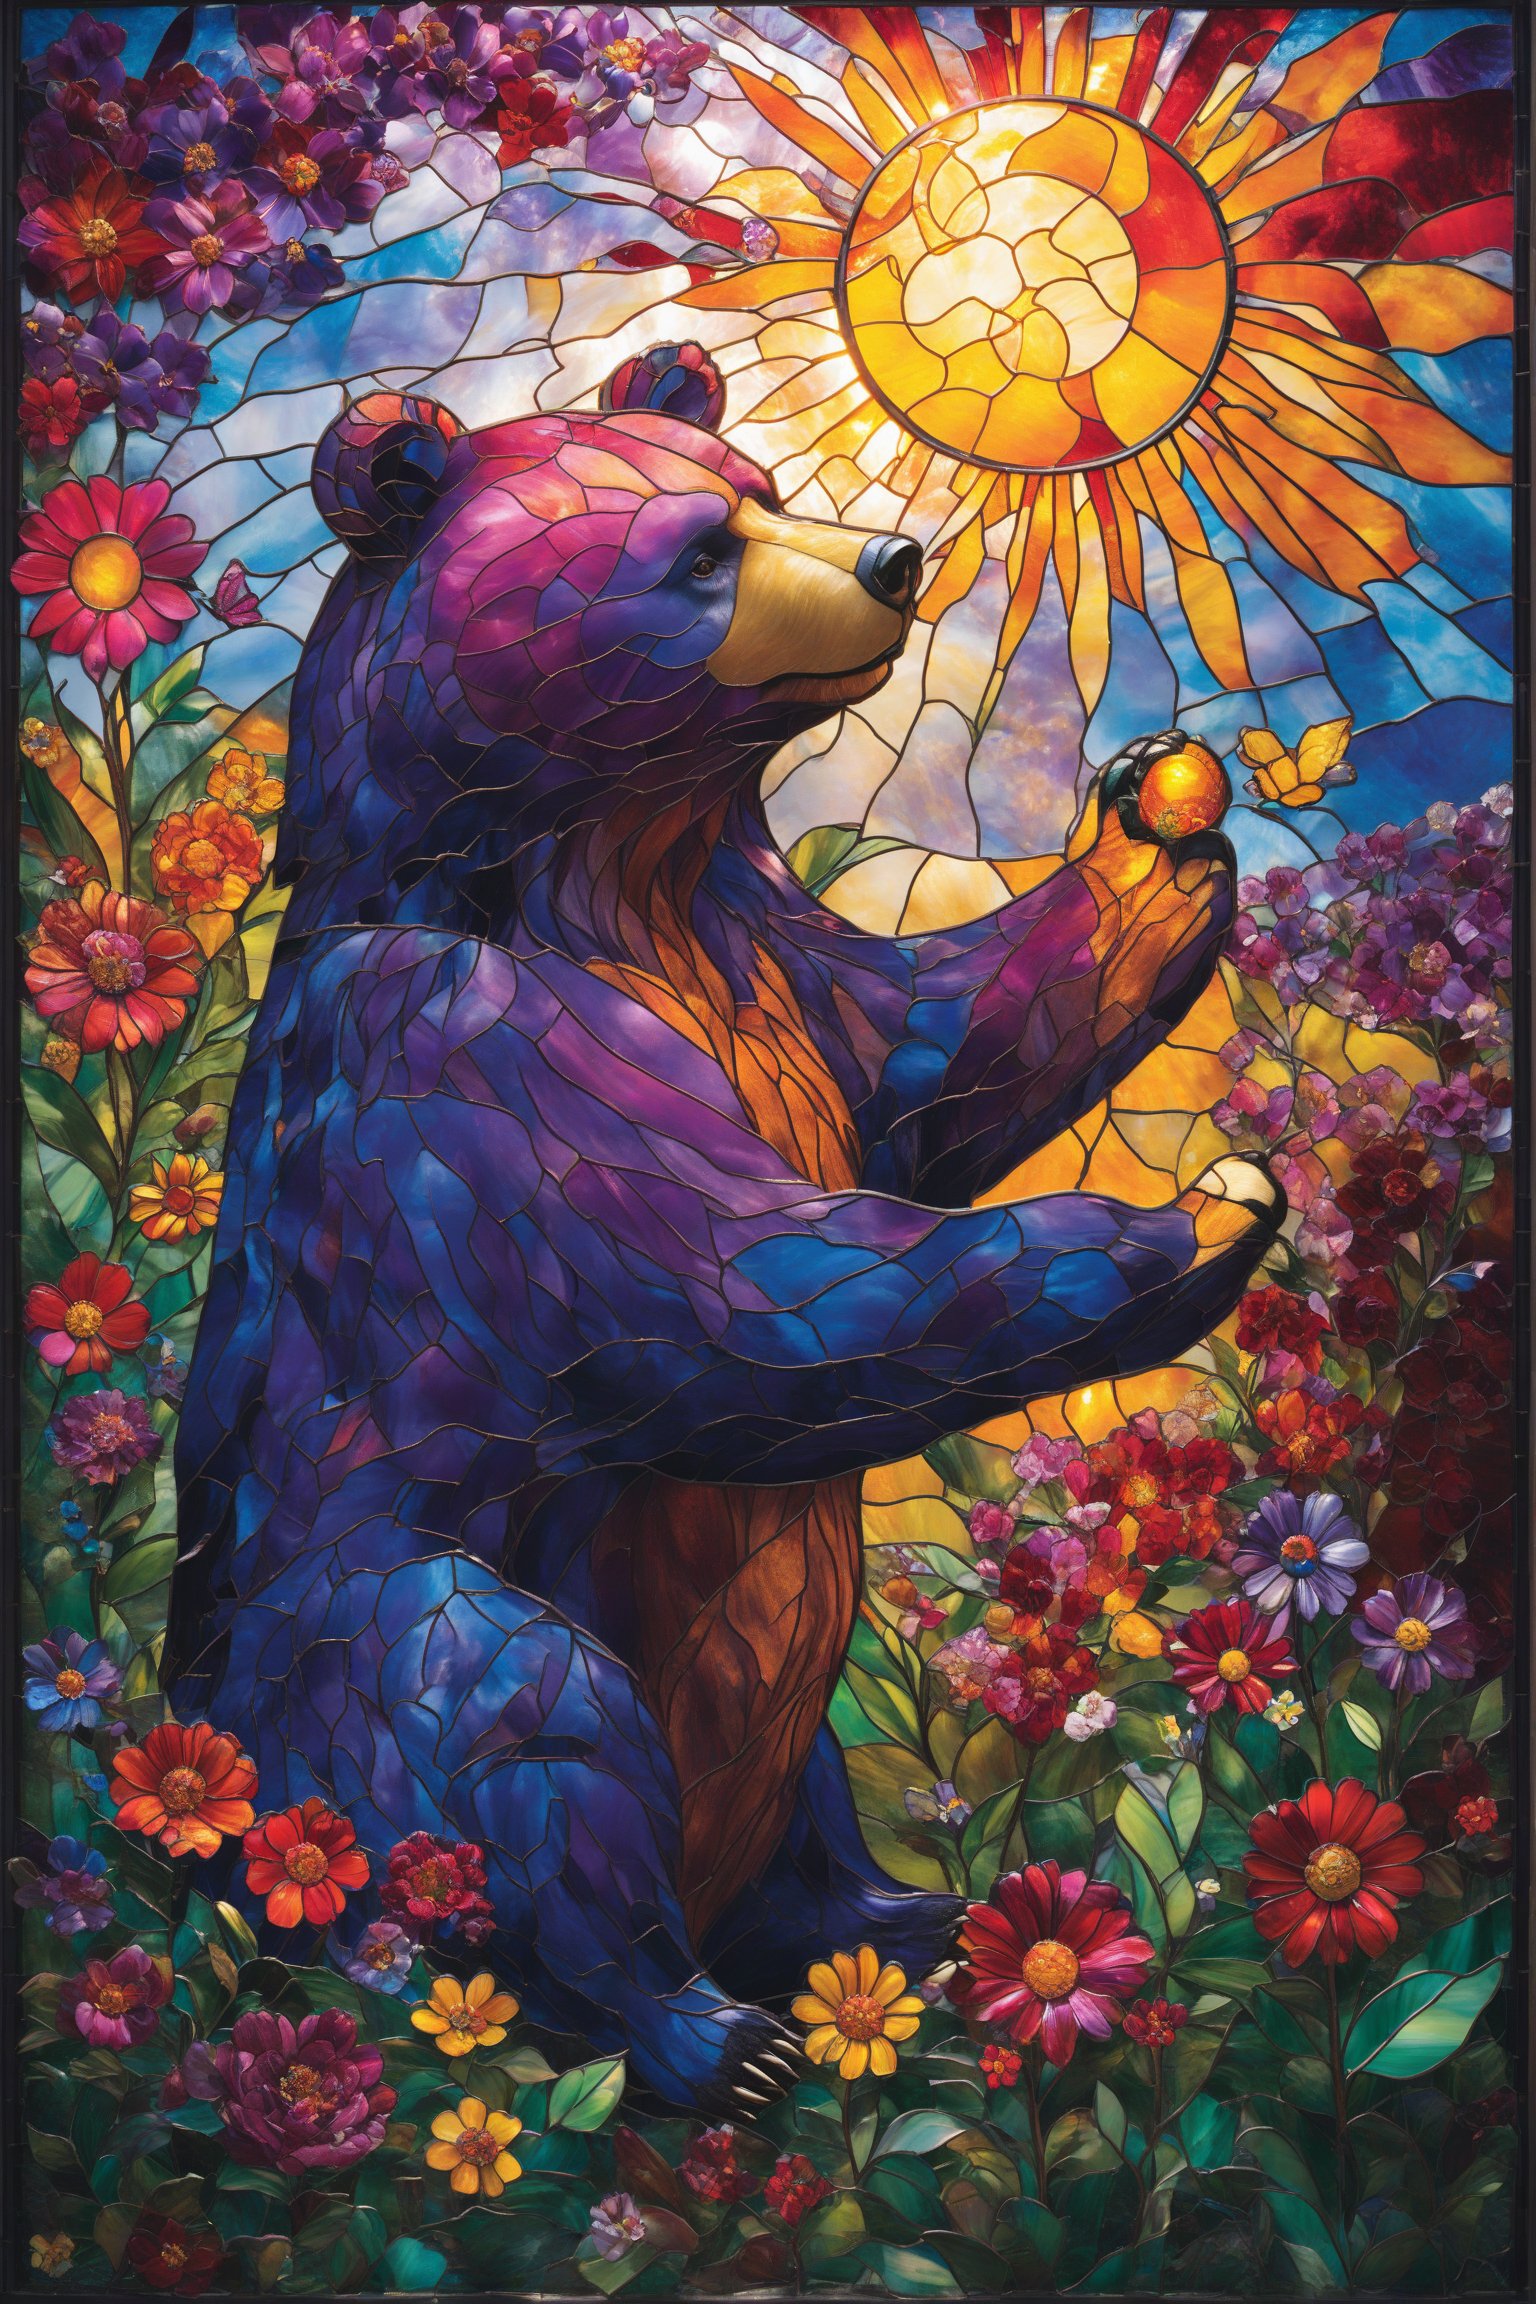 A vibrant stained glass artwork. At its center, a large, colorful bear is depicted, surrounded by a myriad of flowers in various shades of red, yellow, and purple. Above the bear, a radiant sun shines down, casting a warm glow. To the left of the bear, a young girl with dark hair and a red bow is seen, reaching out to the bear with a golden orb in her hand. The background is filled with more flowers and leaves, creating a lush, dreamy landscape.